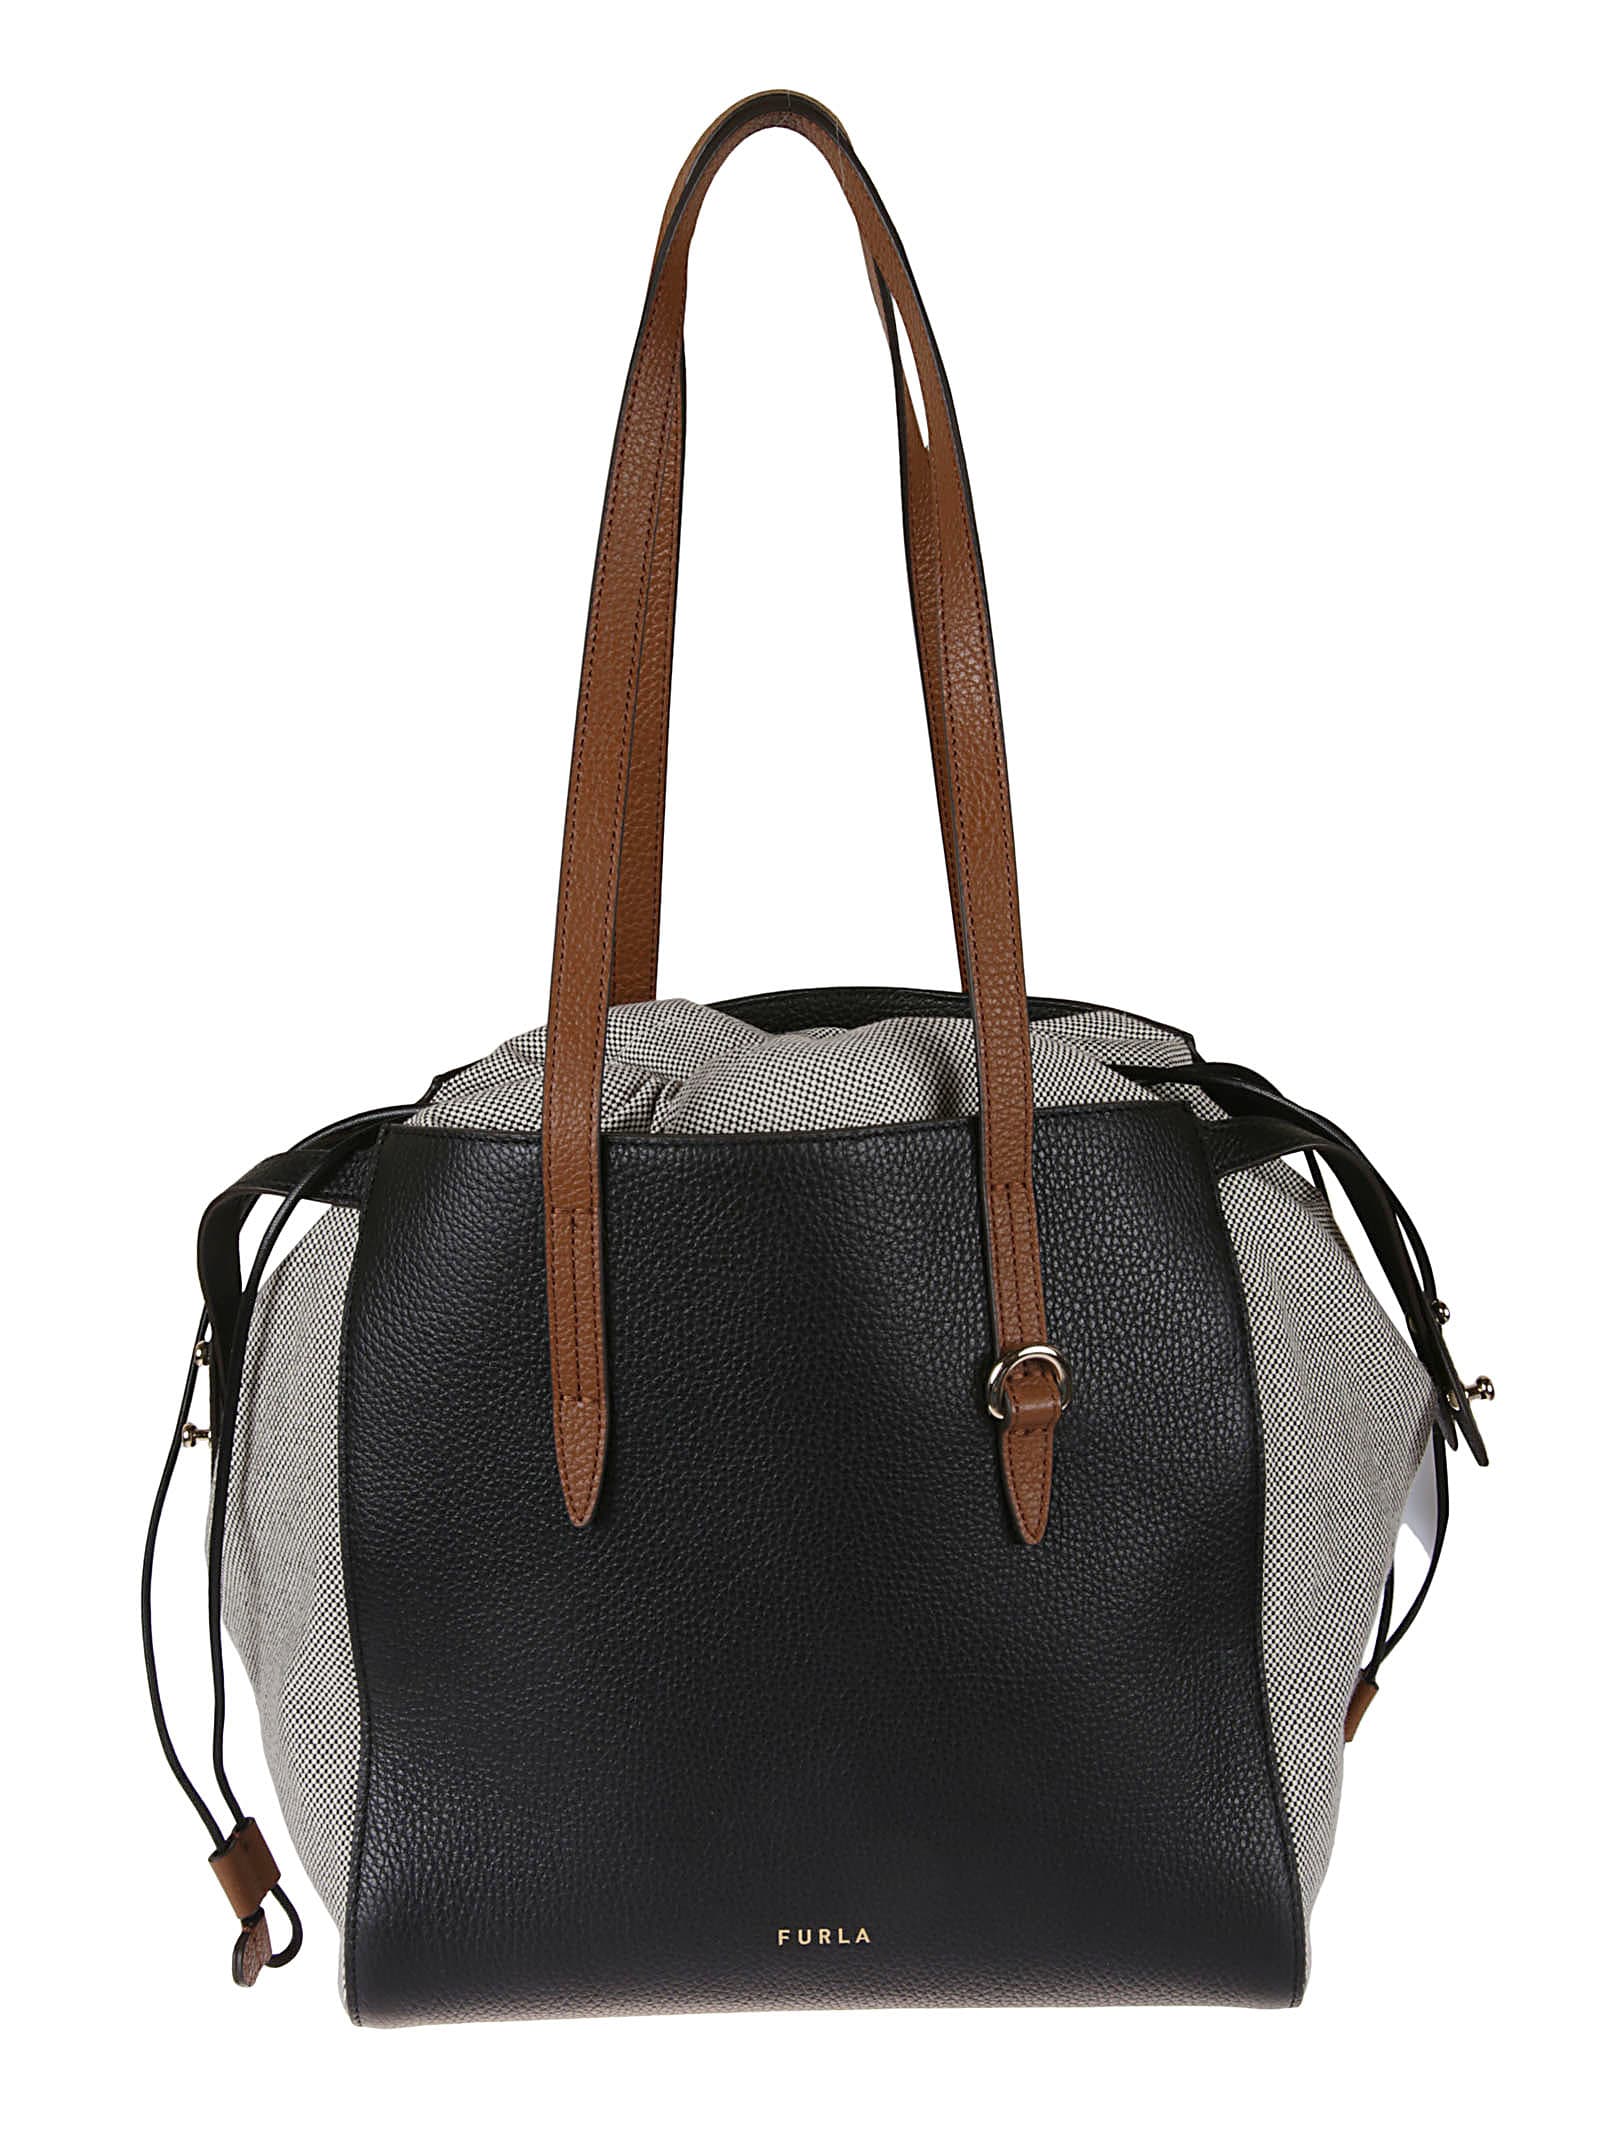 Furla Grained Leather Drawstring Tote